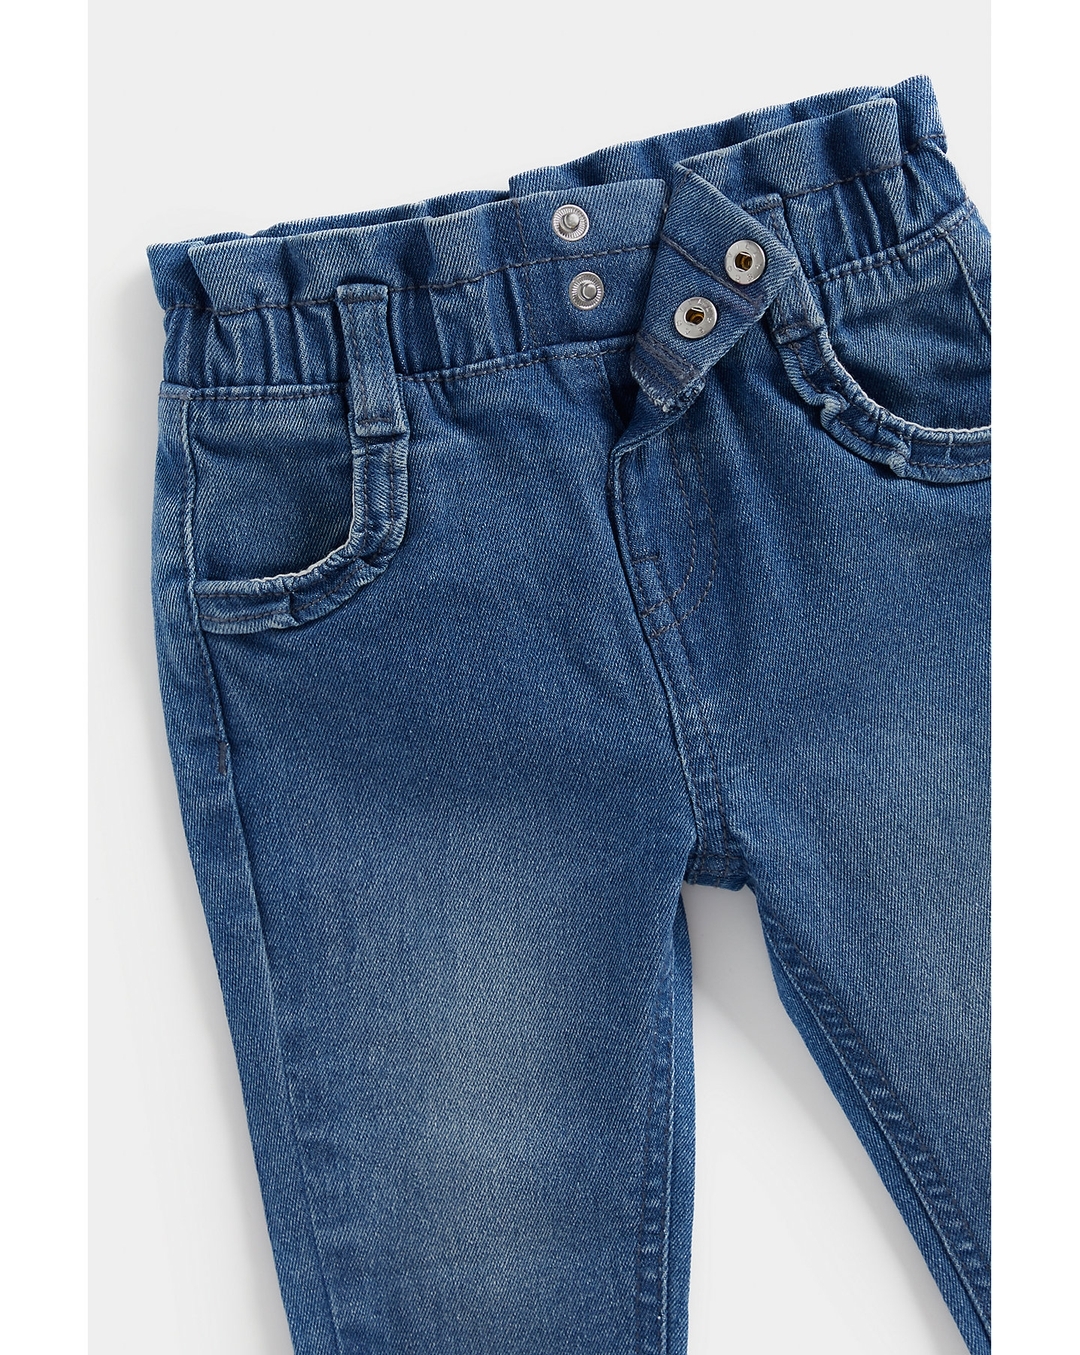 Share more than 231 blue denim jeans for girls latest